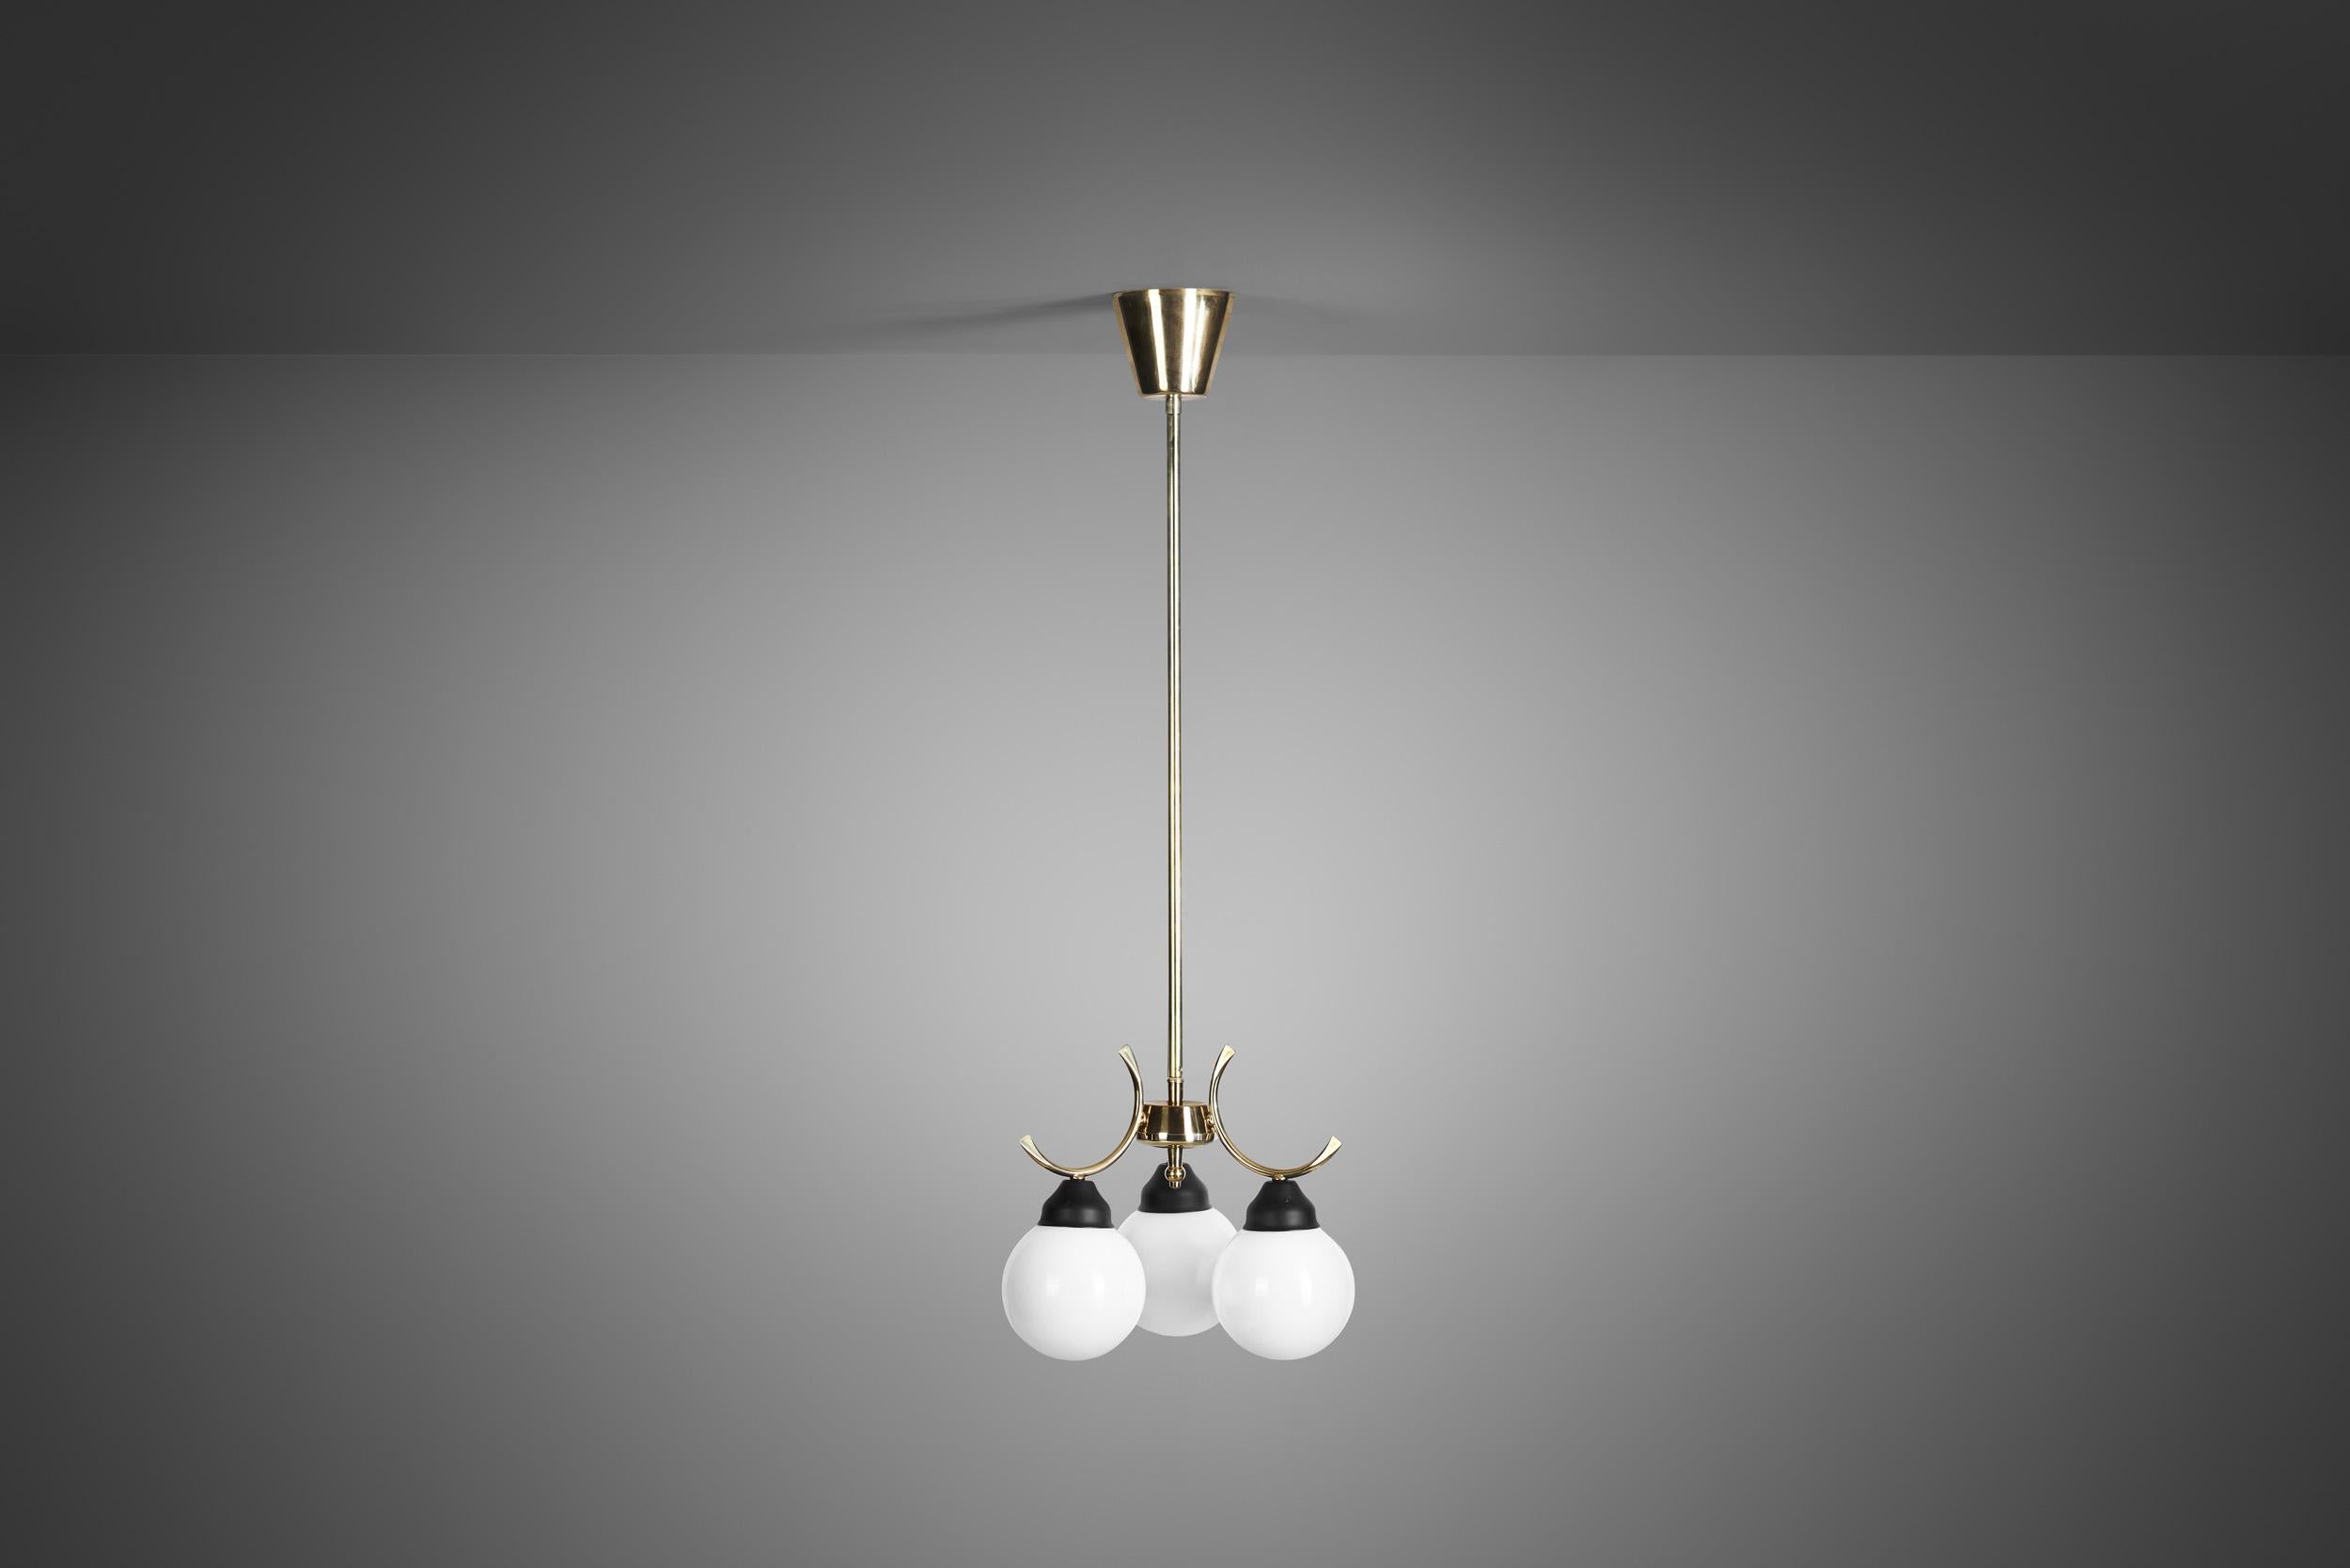 European Mid-Century Modern Brass and Glass Ceiling Lamp, Europe, circa 1950s For Sale